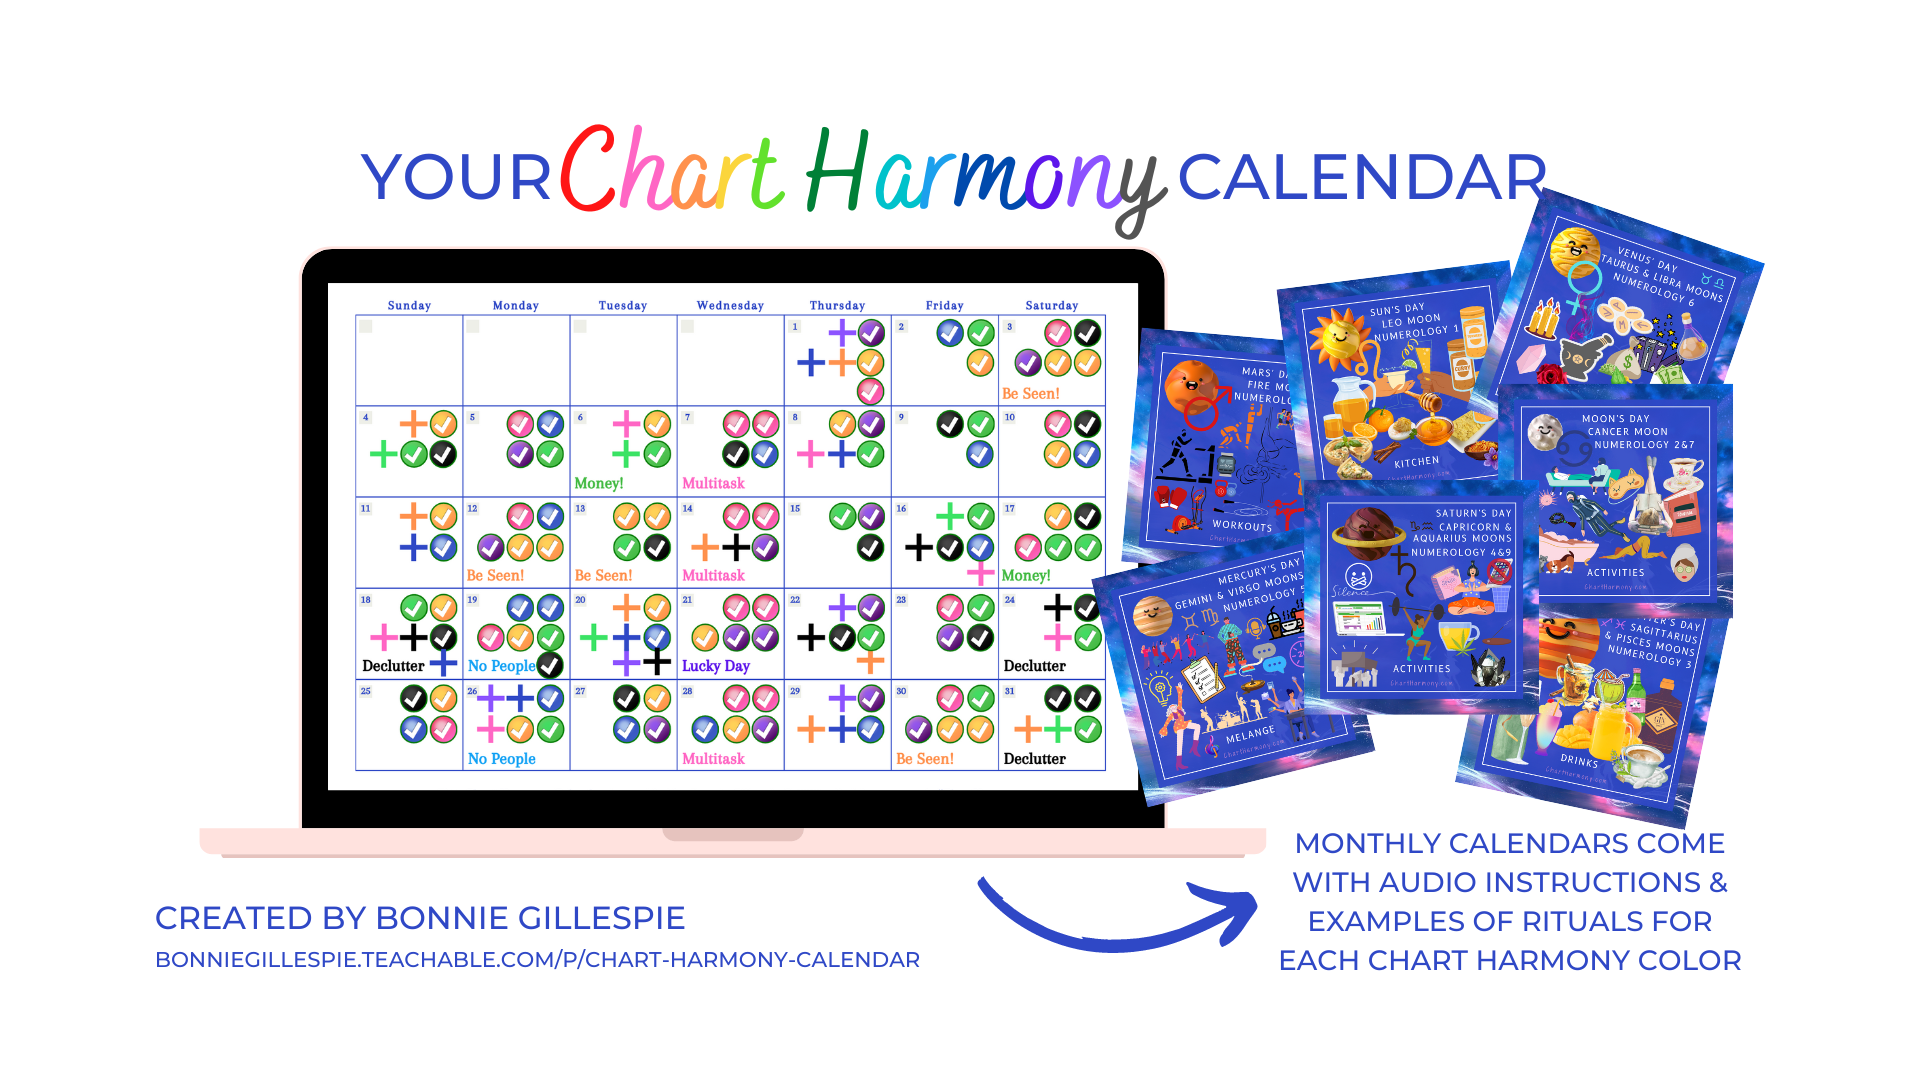 Chart Harmony Calendar on laptop screen, Chart Harmony rituals and remedies on quick-reference cards in foreground